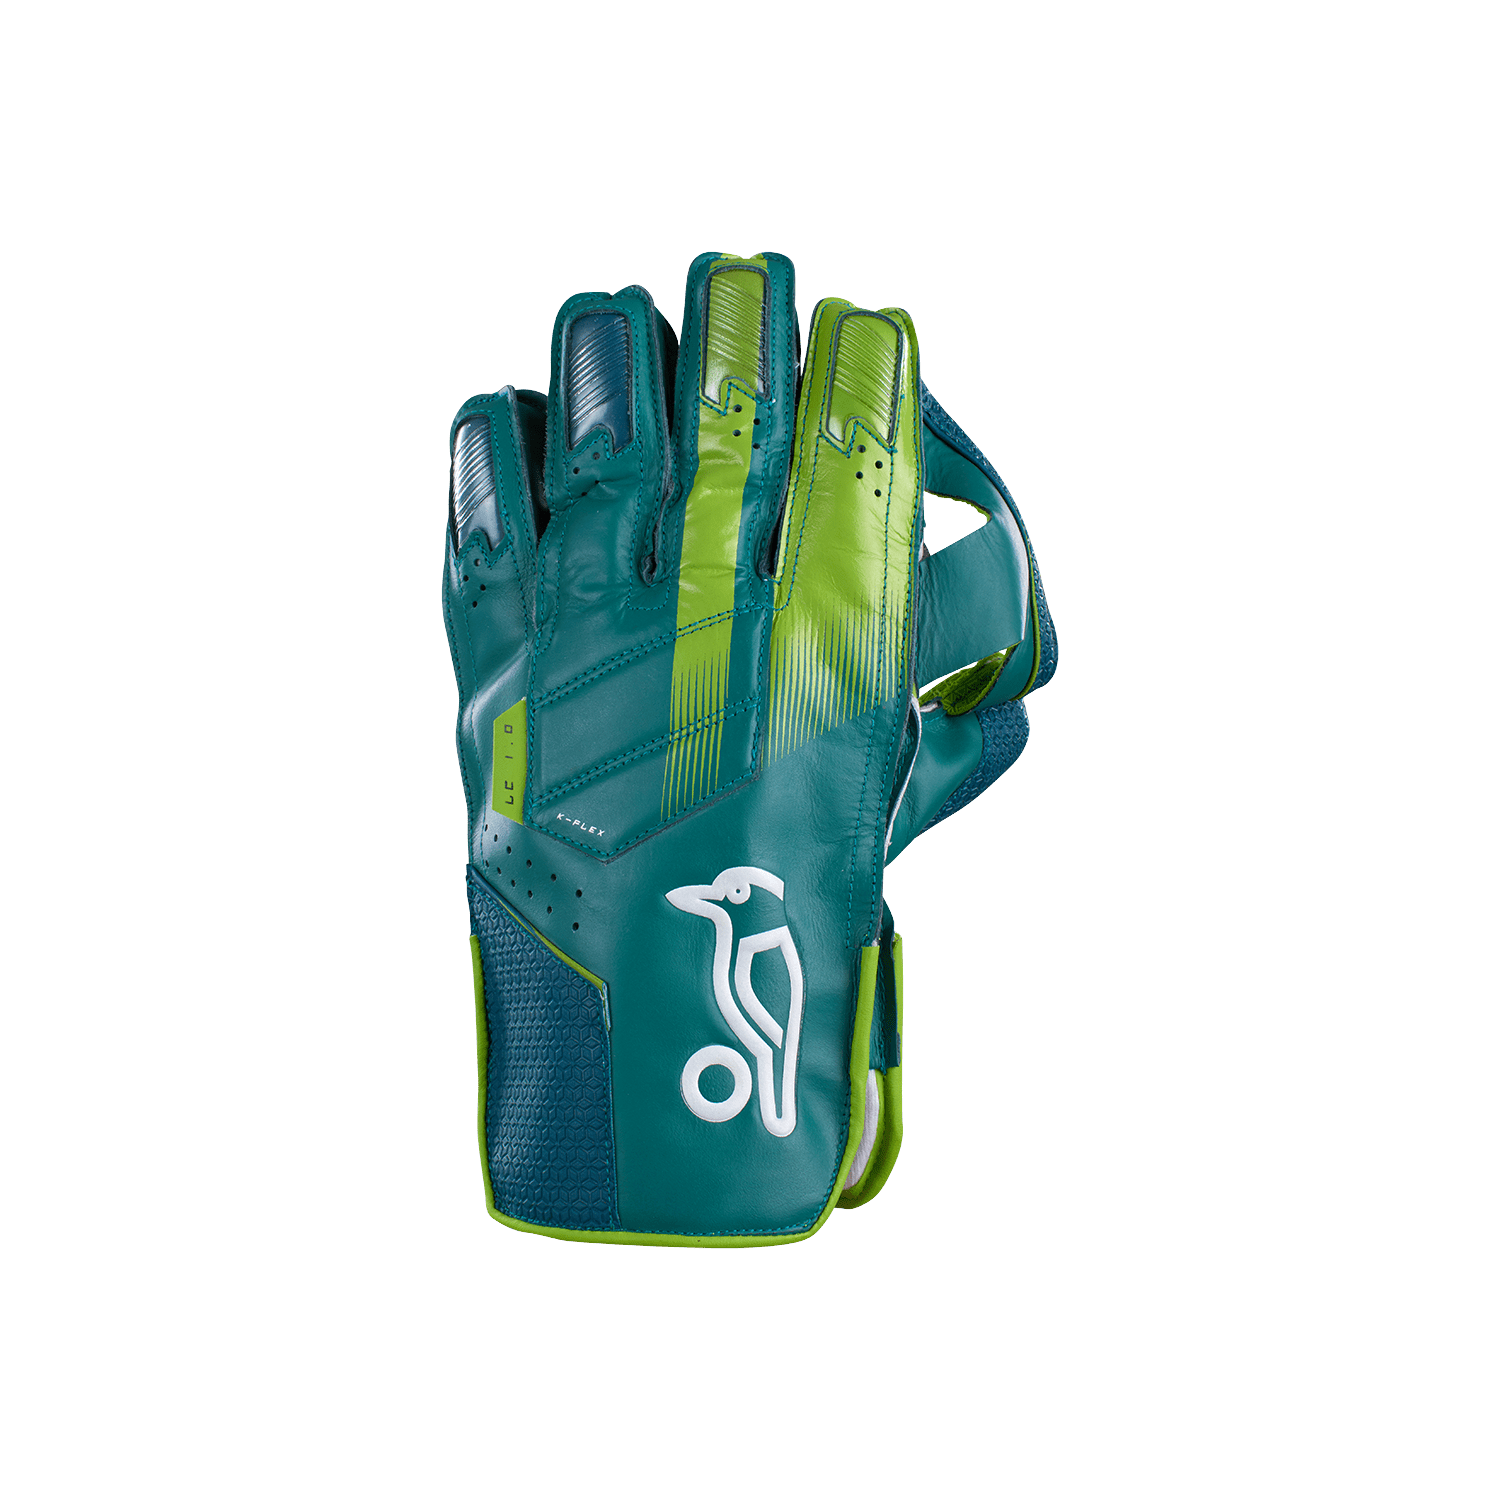 LC 10 WICKET KEEPING GLOVE